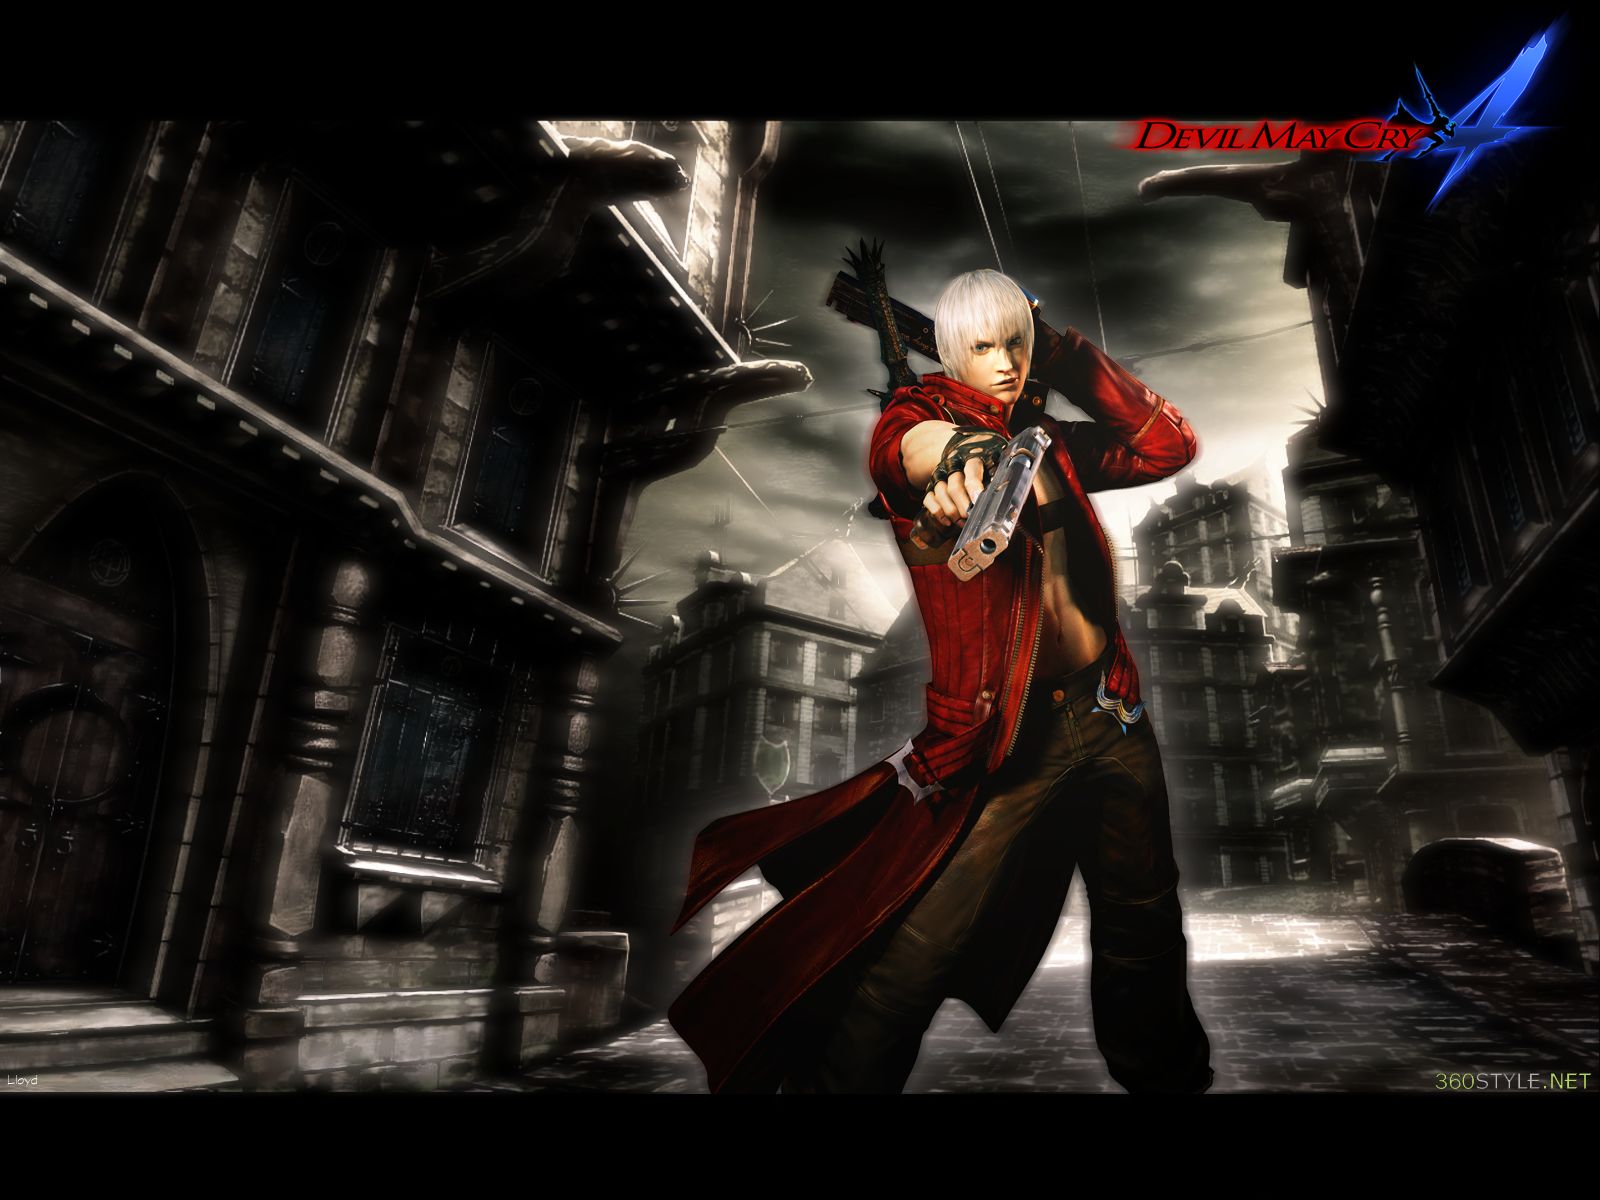 devil may cry [wallpapers hd]